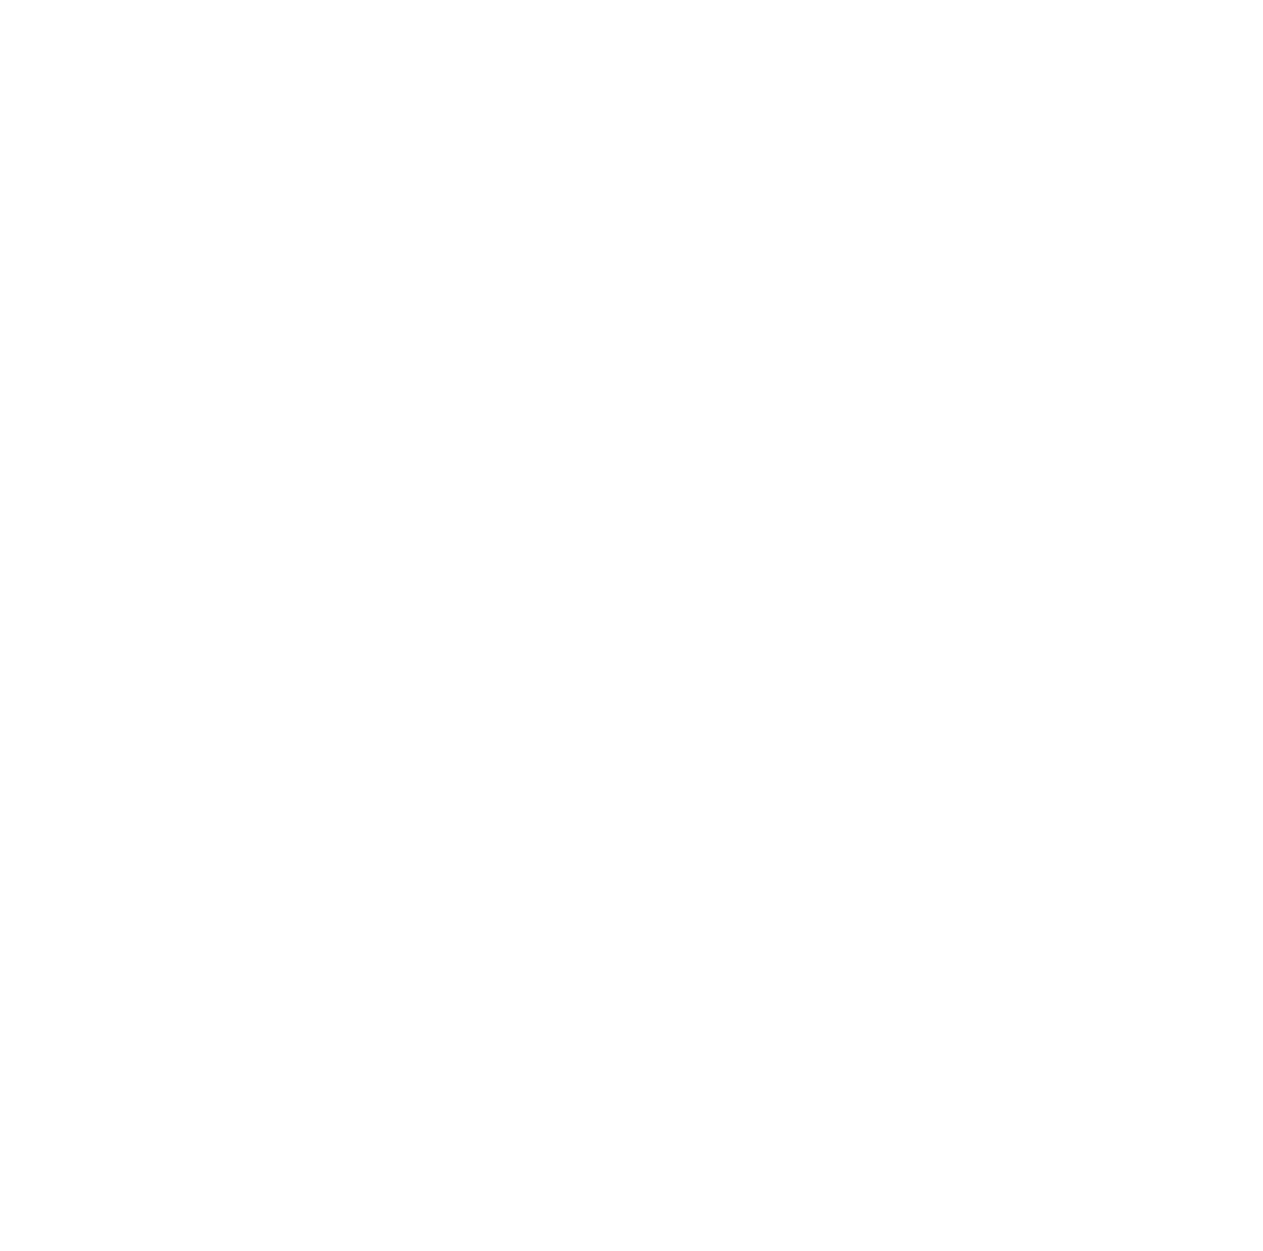 White logo with transparent background for Bland Richter, LLP - South Carolina medical malpractice, legal malpractice, and trucking accident attorneys